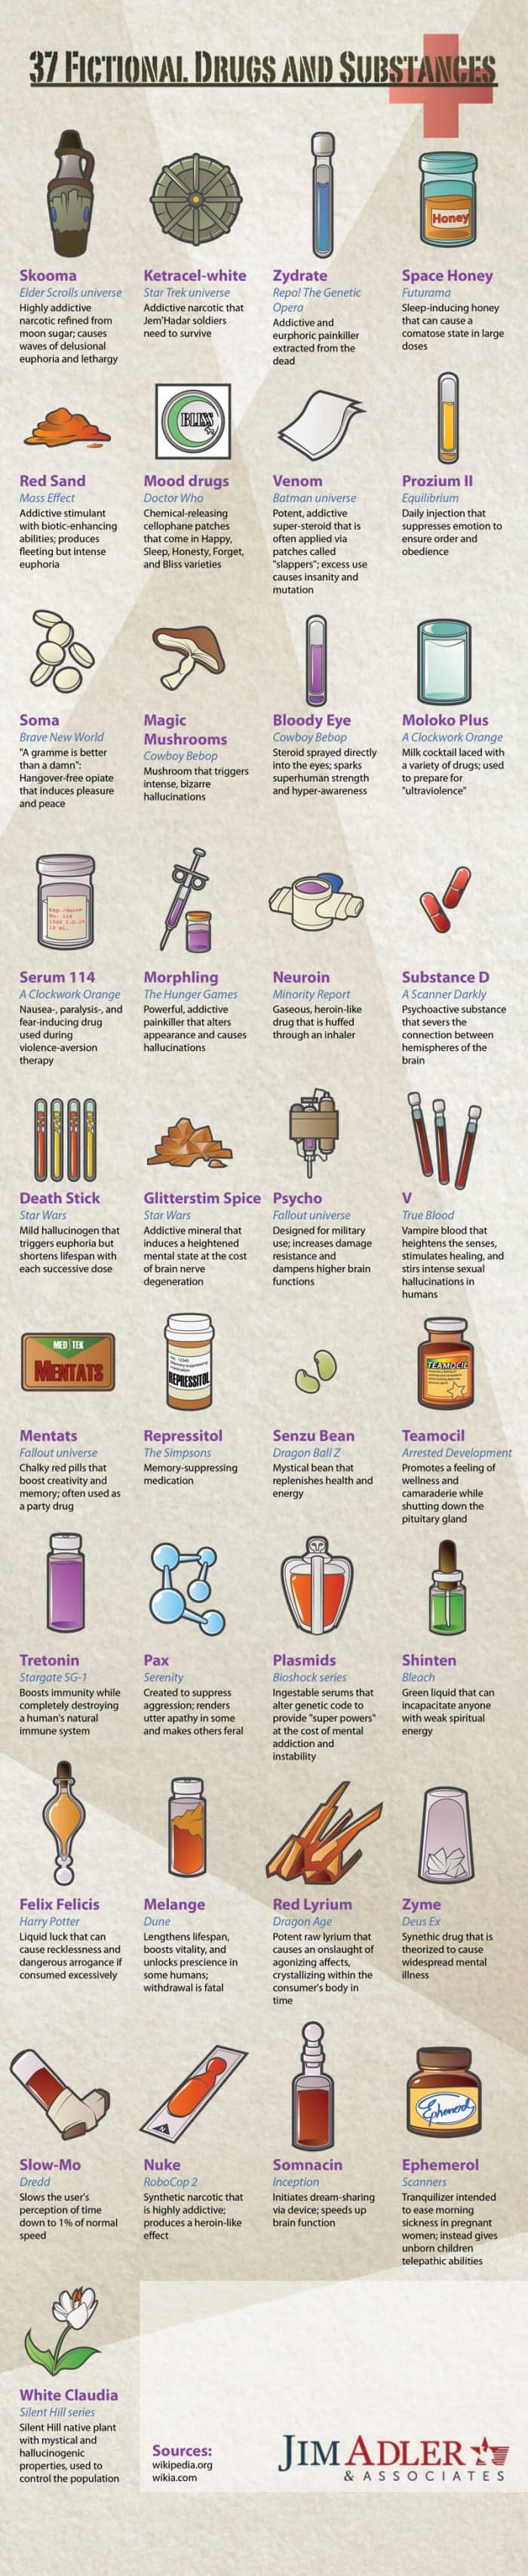 37 Fictional Drugs and Substances